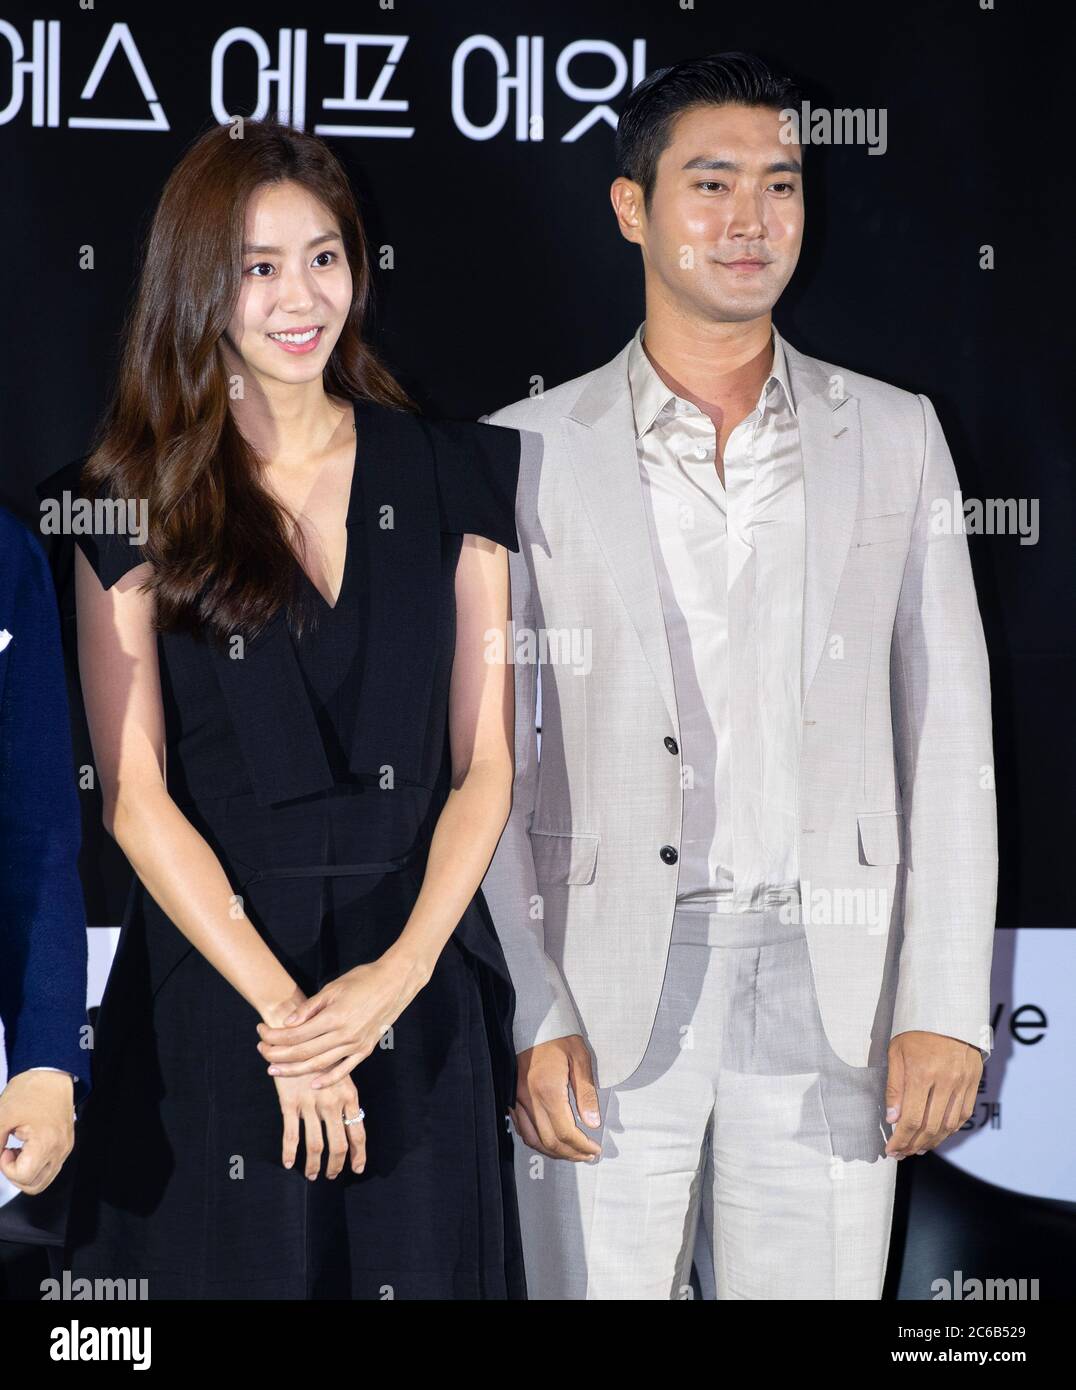 Seoul, South Korea. 8th July, 2020. (L to R) South Korean actress Uee and actor and singer Choi Si-Won (stage name: Siwon) member of South Korean boy band Super Junior attends the press conference for film 'SF8' at CGV Cinema in Seoul, South Korea on July 8, 2020. The film will be open on July 10 through the OTT platform Wavve. (Photo by Lee Young-ho/Sipa USA) Credit: Sipa USA/Alamy Live News Stock Photo